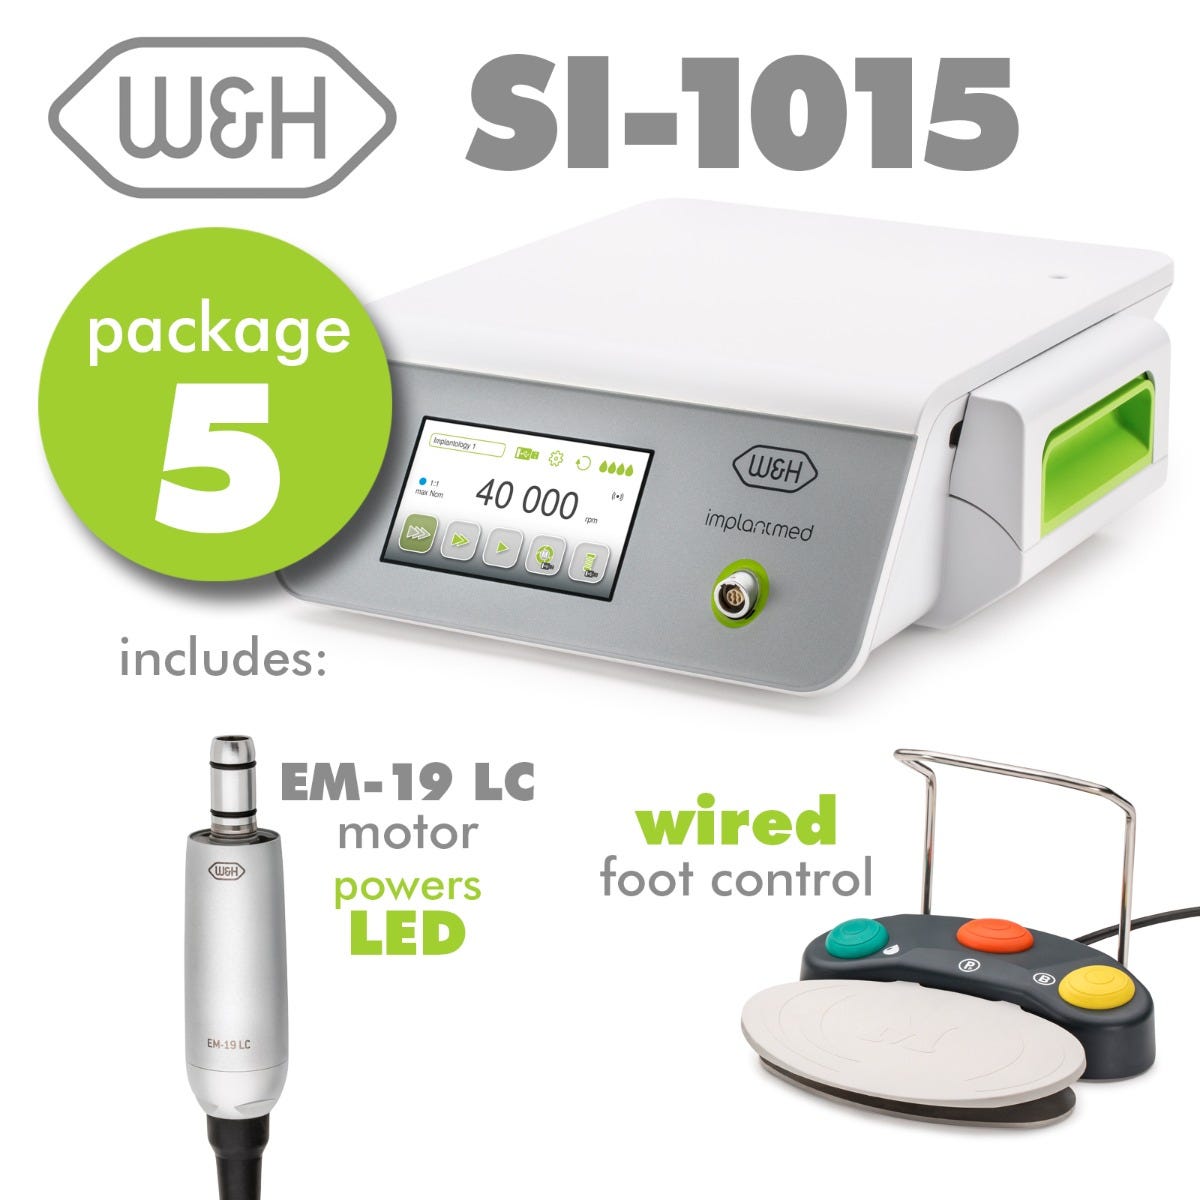 Implantmed Plus Set 5- Includes: SI-1015 Control Unit , EM-19LC Motor, Wired Foot Control